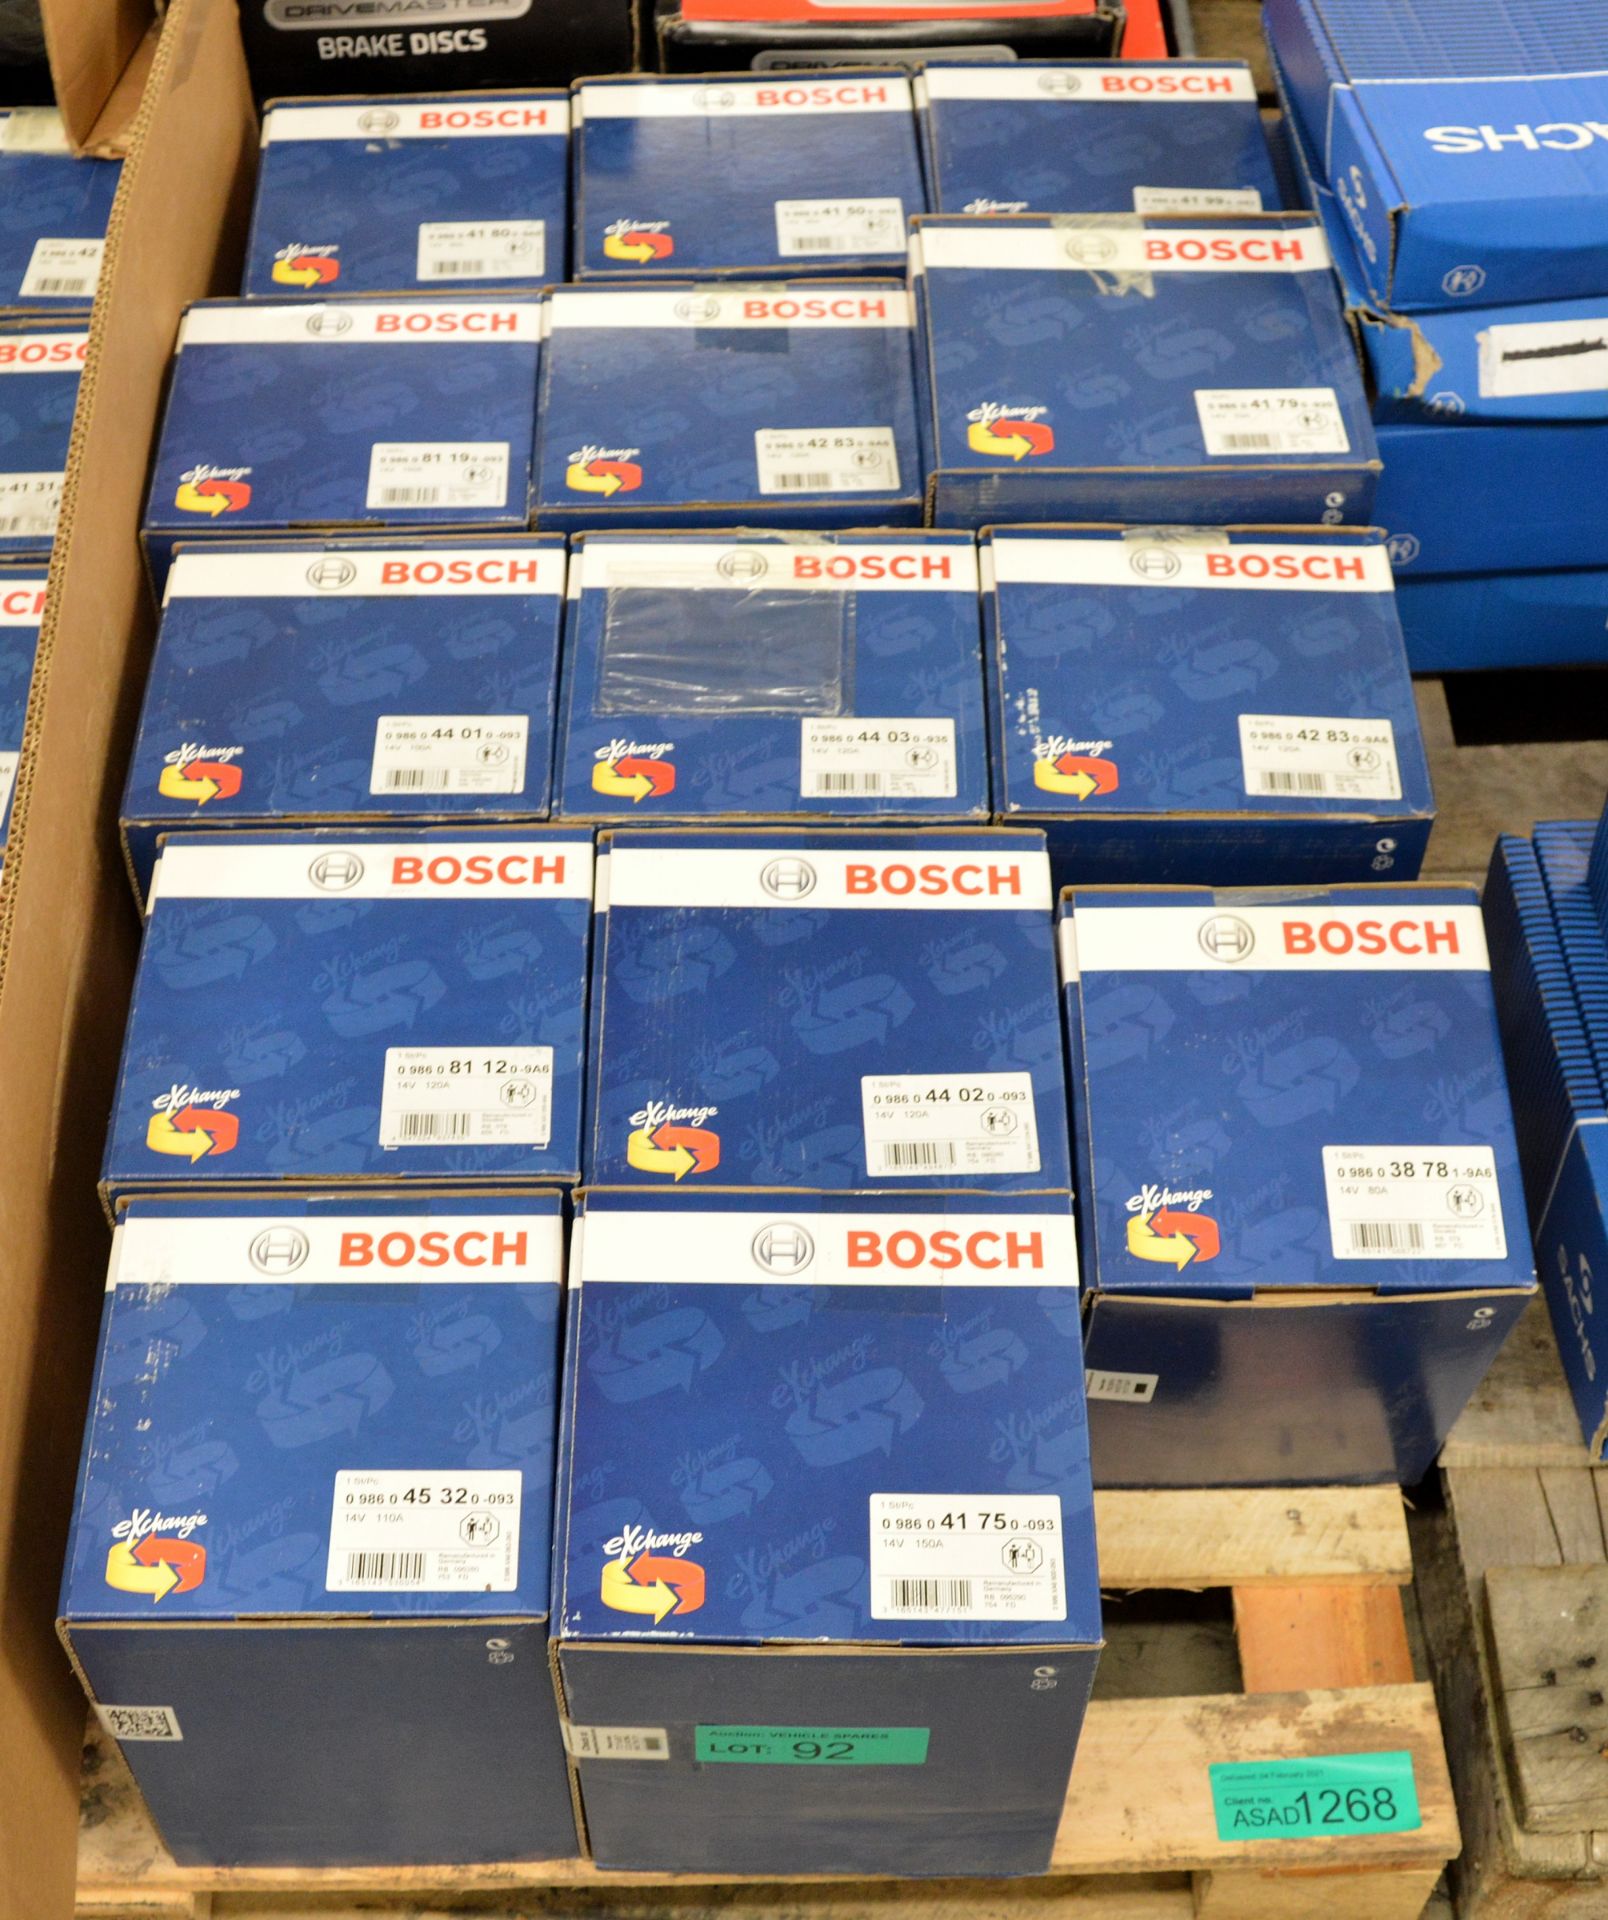 Bosch Alternators - See photos for part numbers